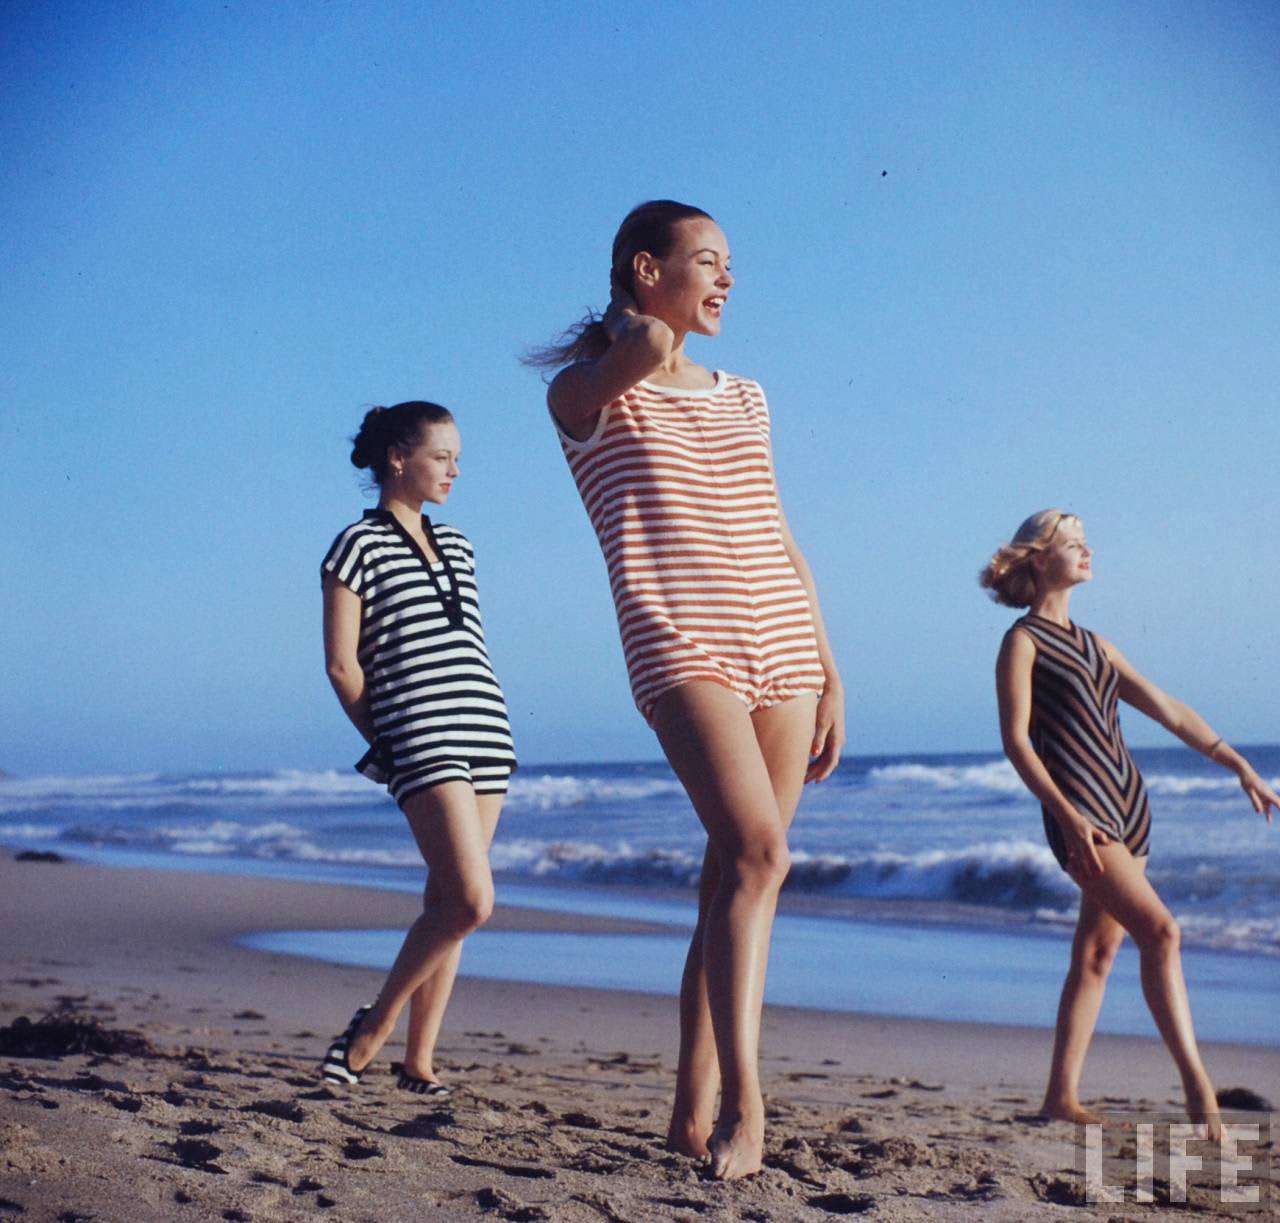 Bikinis, Swimsuits and all other types of beach wears started emerging in 1950s, designers instroduced wide variety of unique styles.